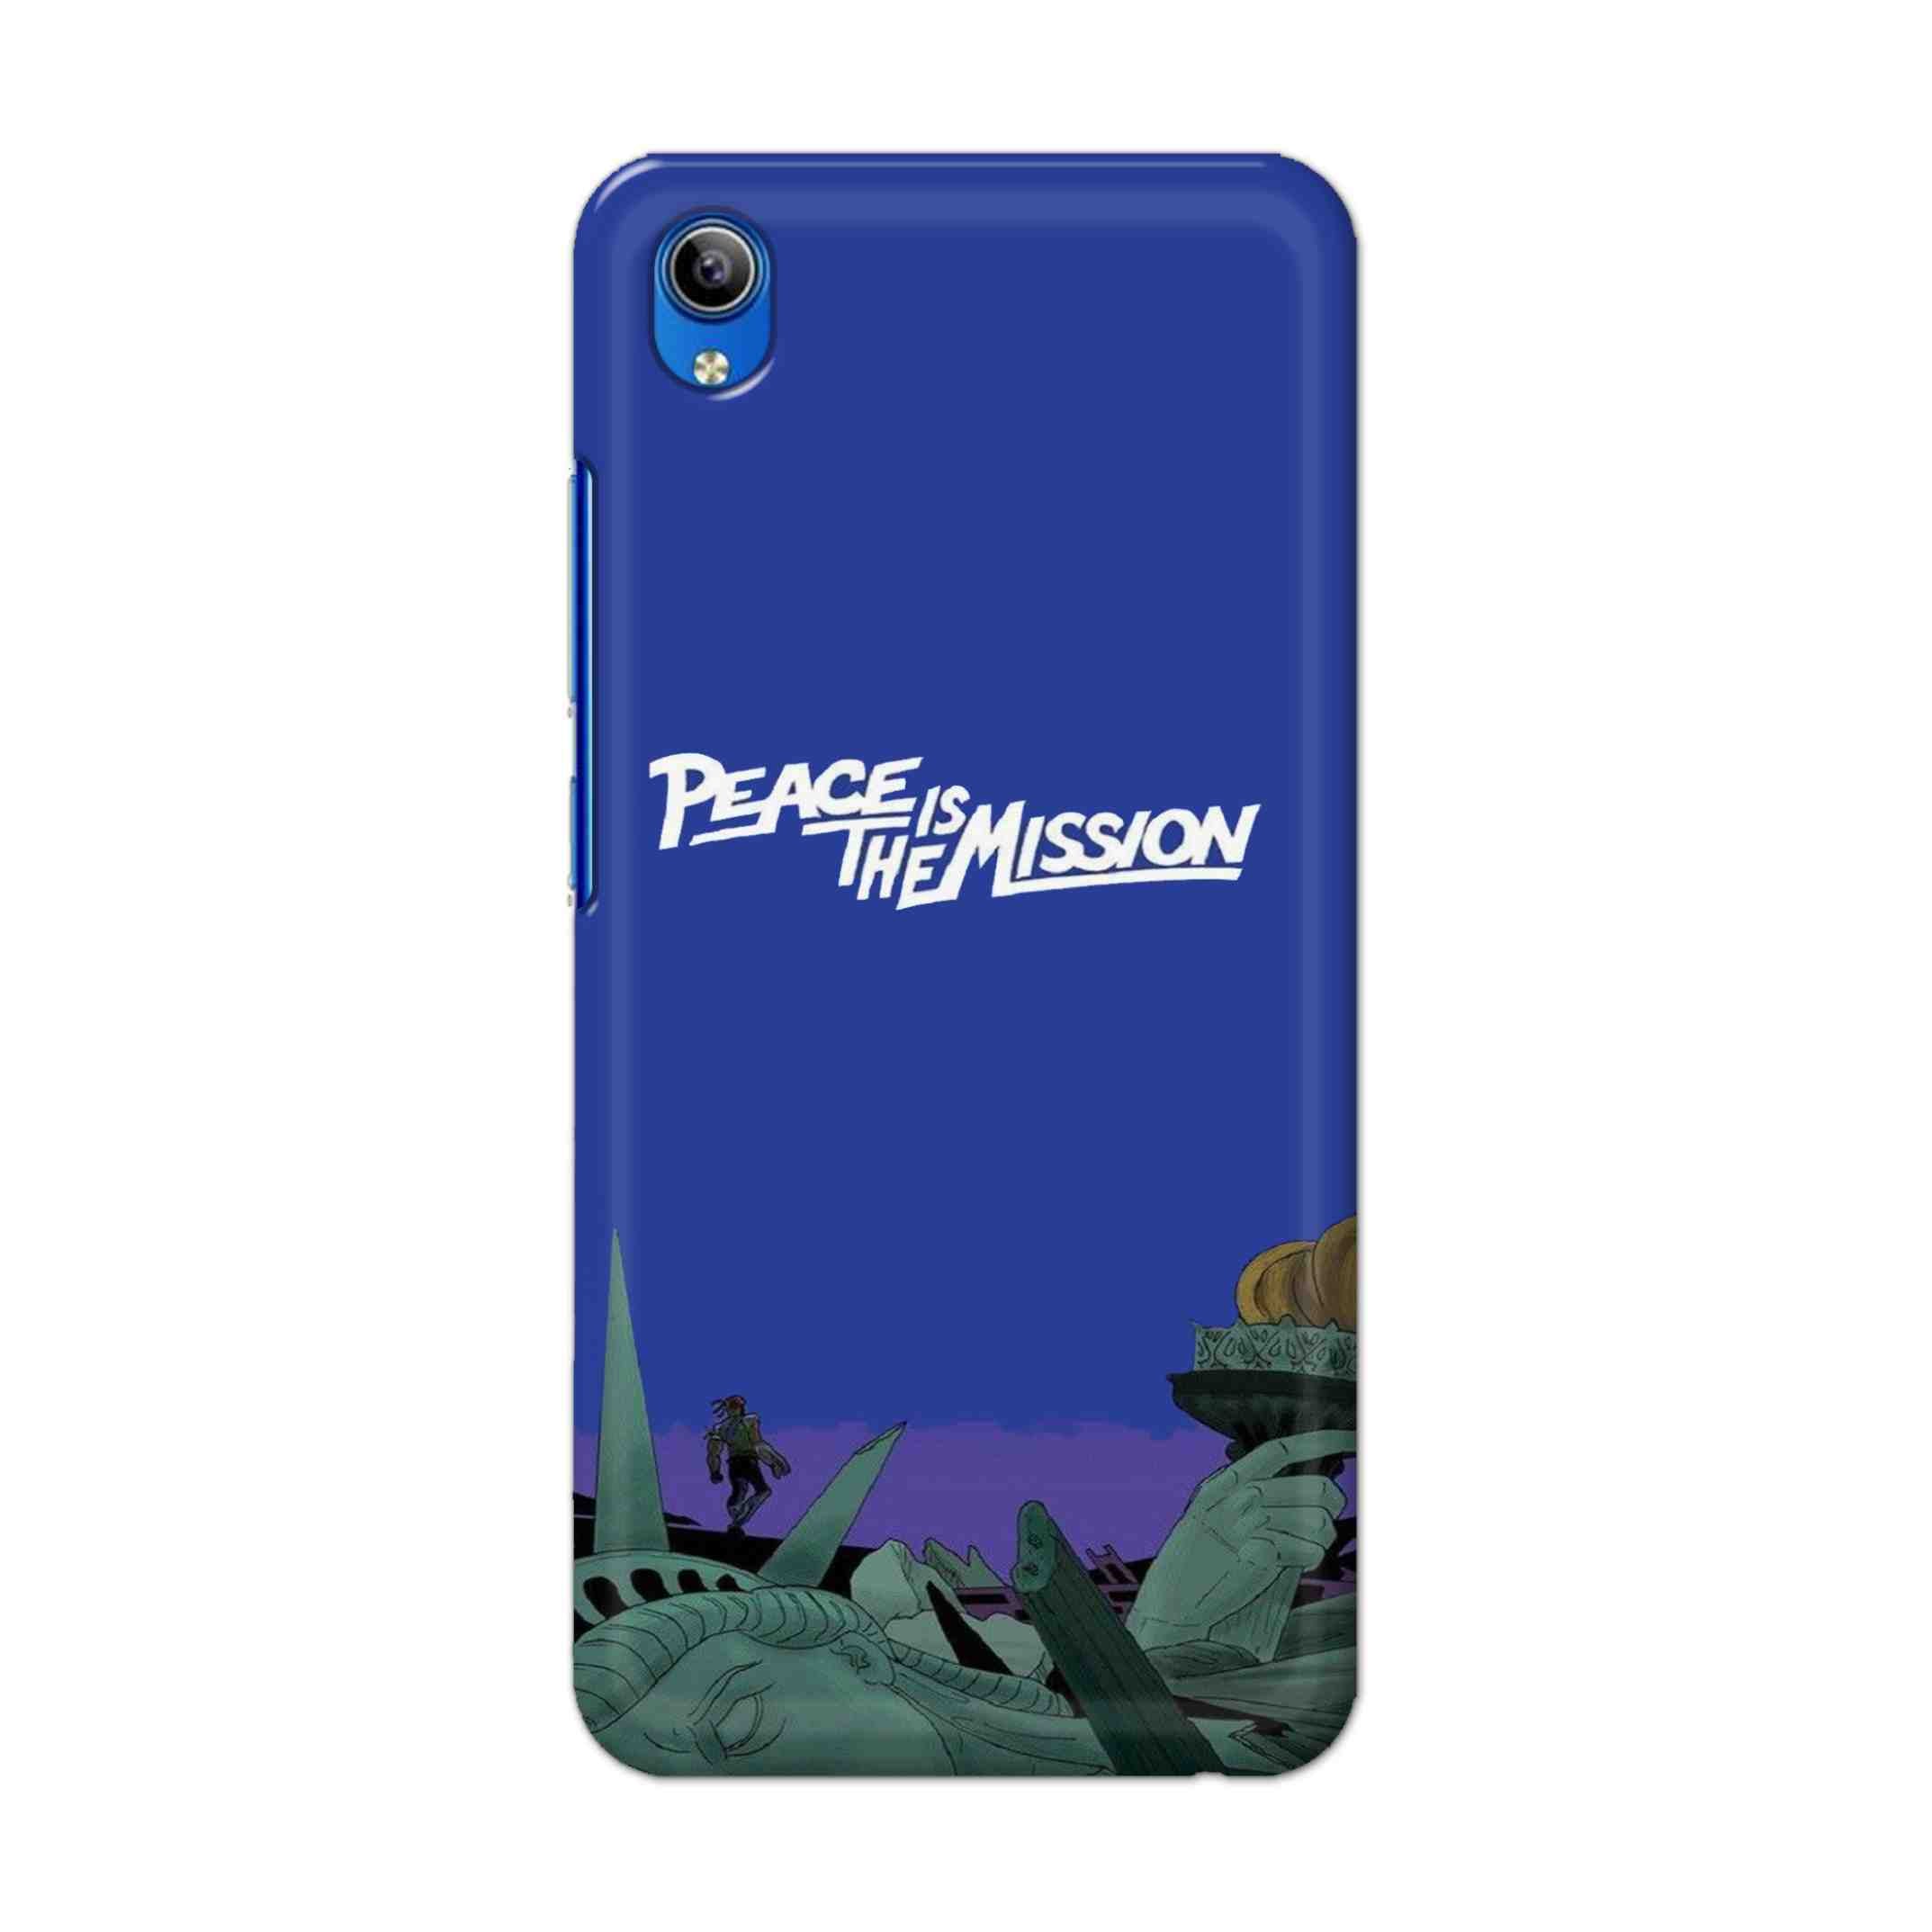 Buy Peace Is The Misson Hard Back Mobile Phone Case Cover For Vivo Y91i Online